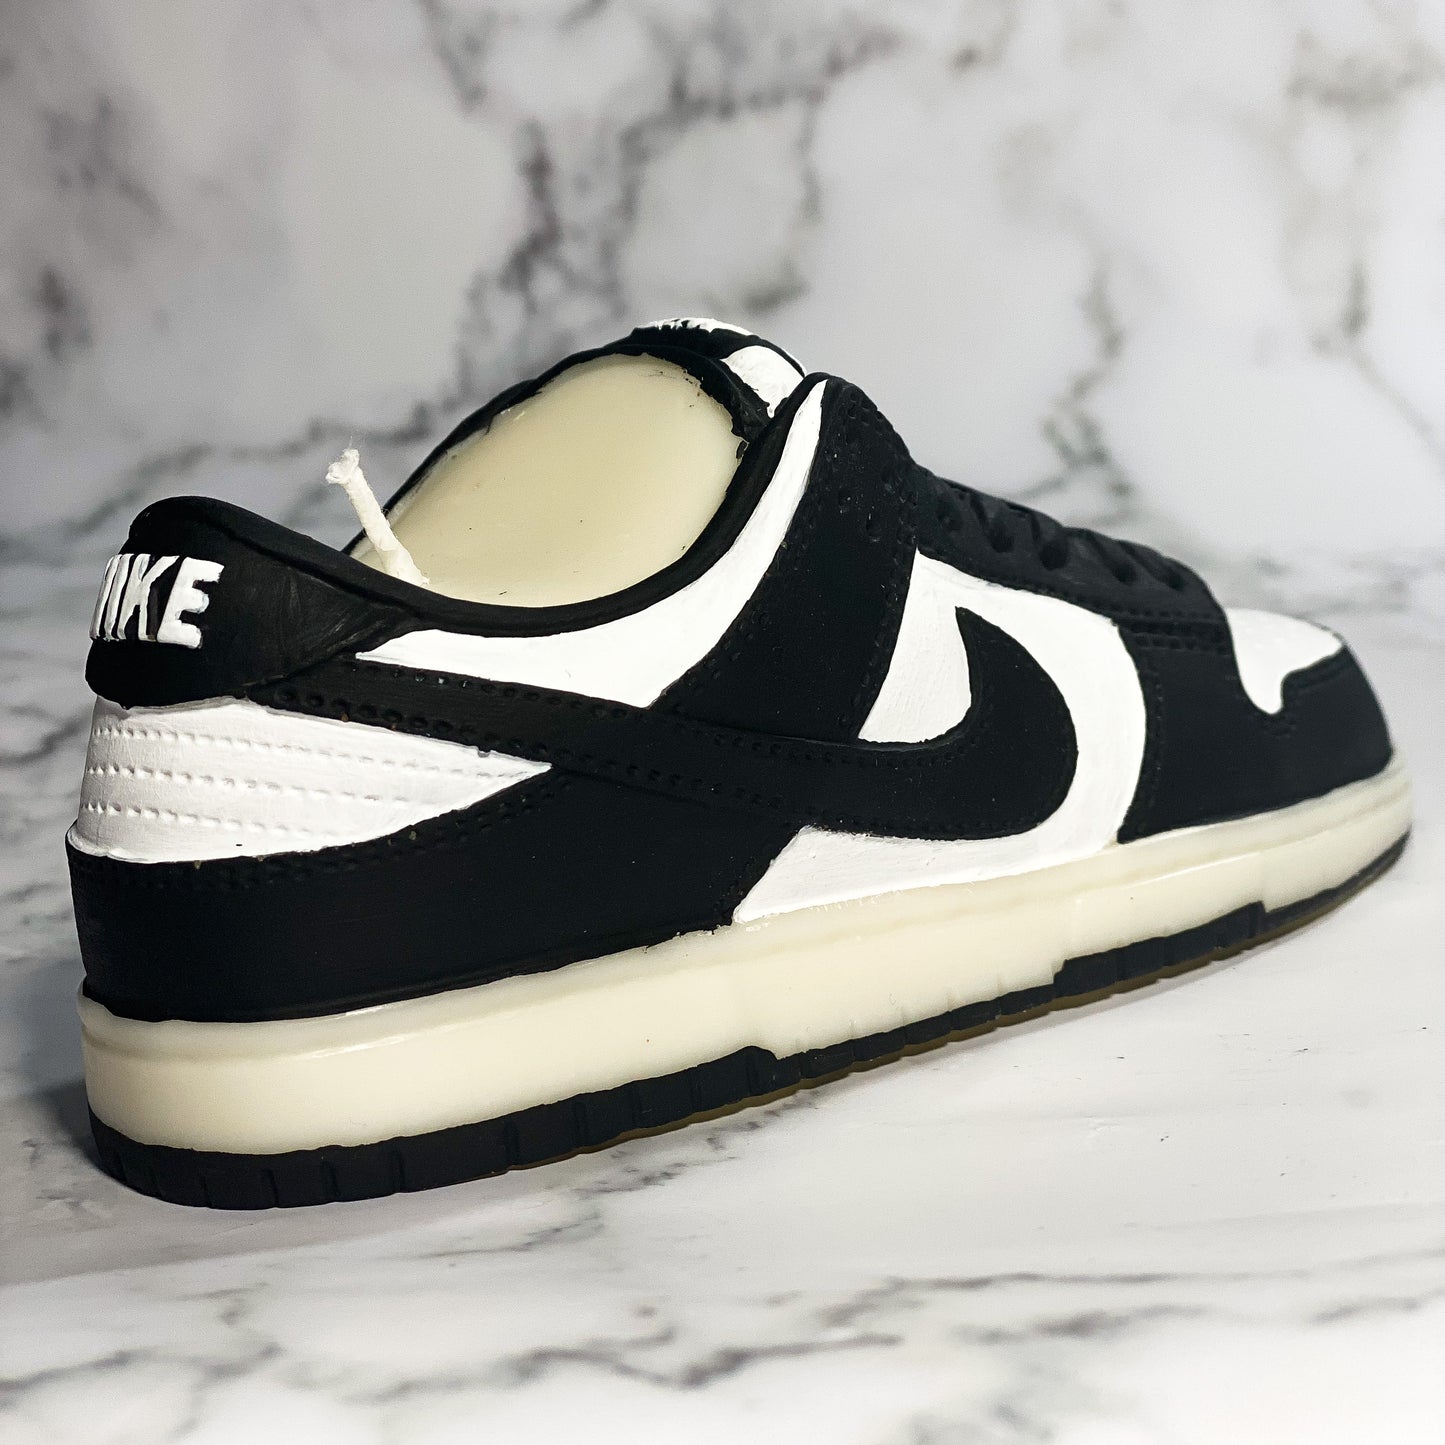 nike black white dunk inspired sneaker candle